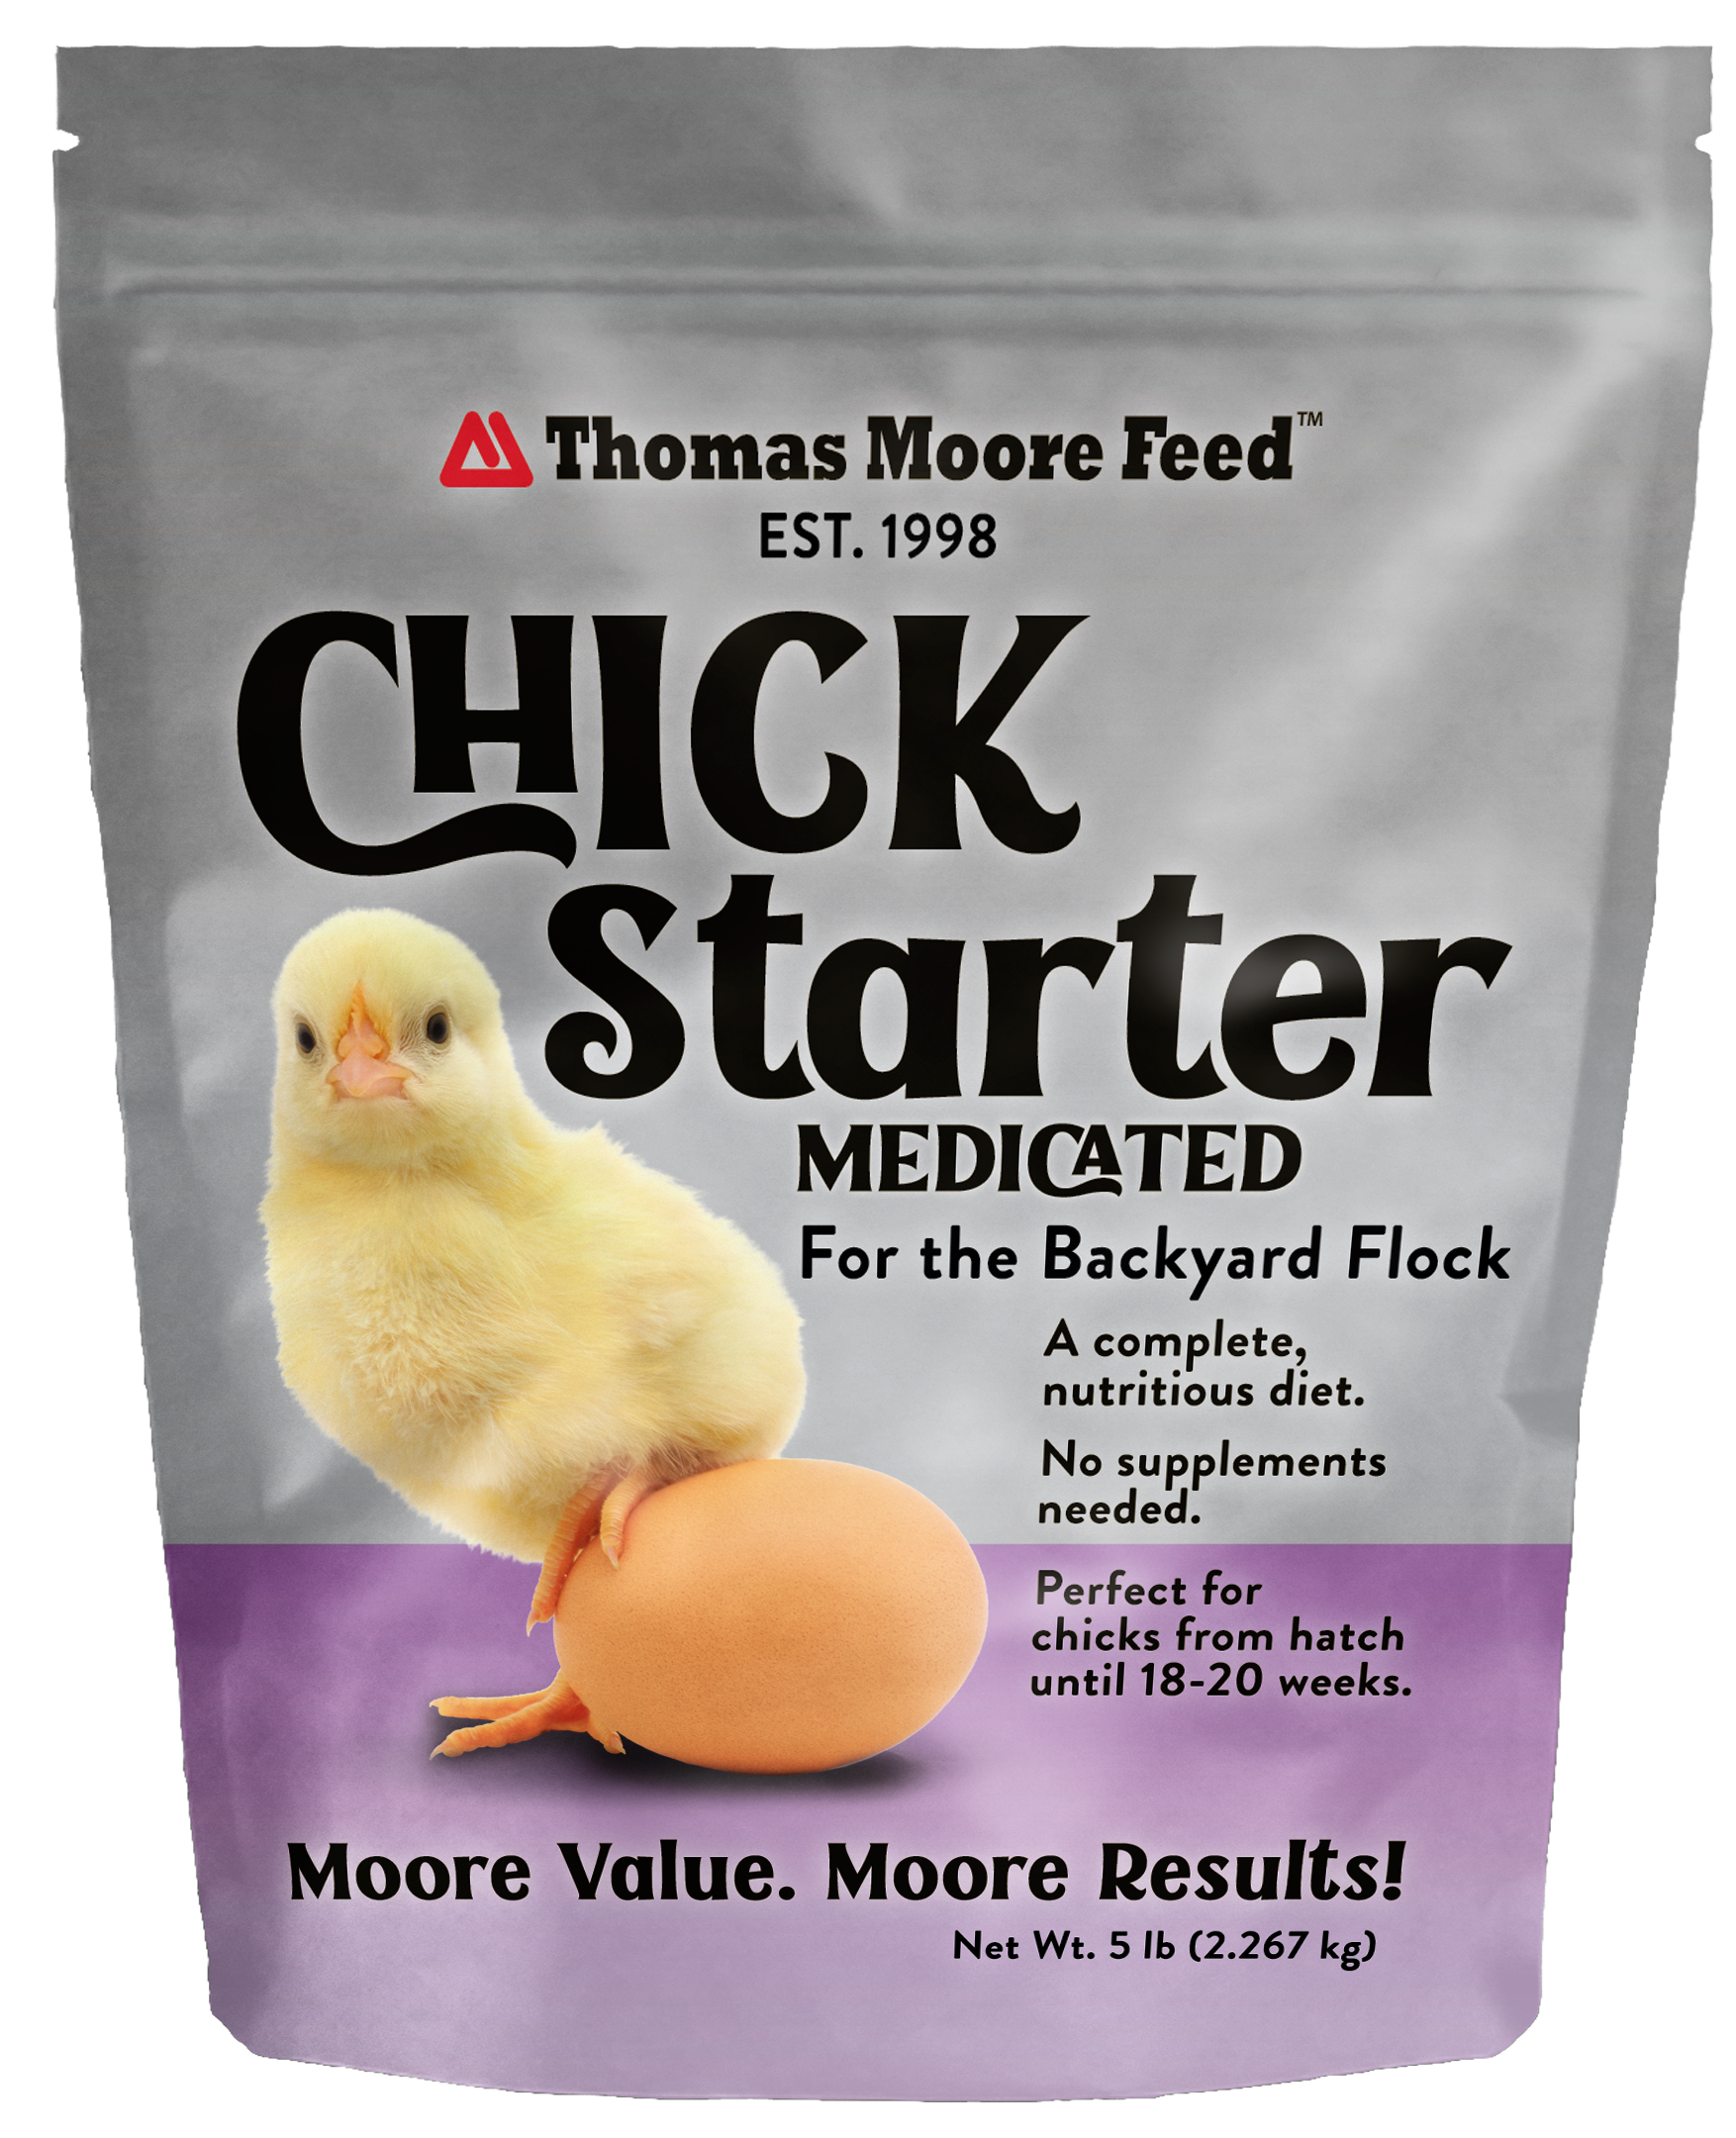 Thomas Moore Feeds Medicated Chick Starter Feed, 5lb - image 1 of 1